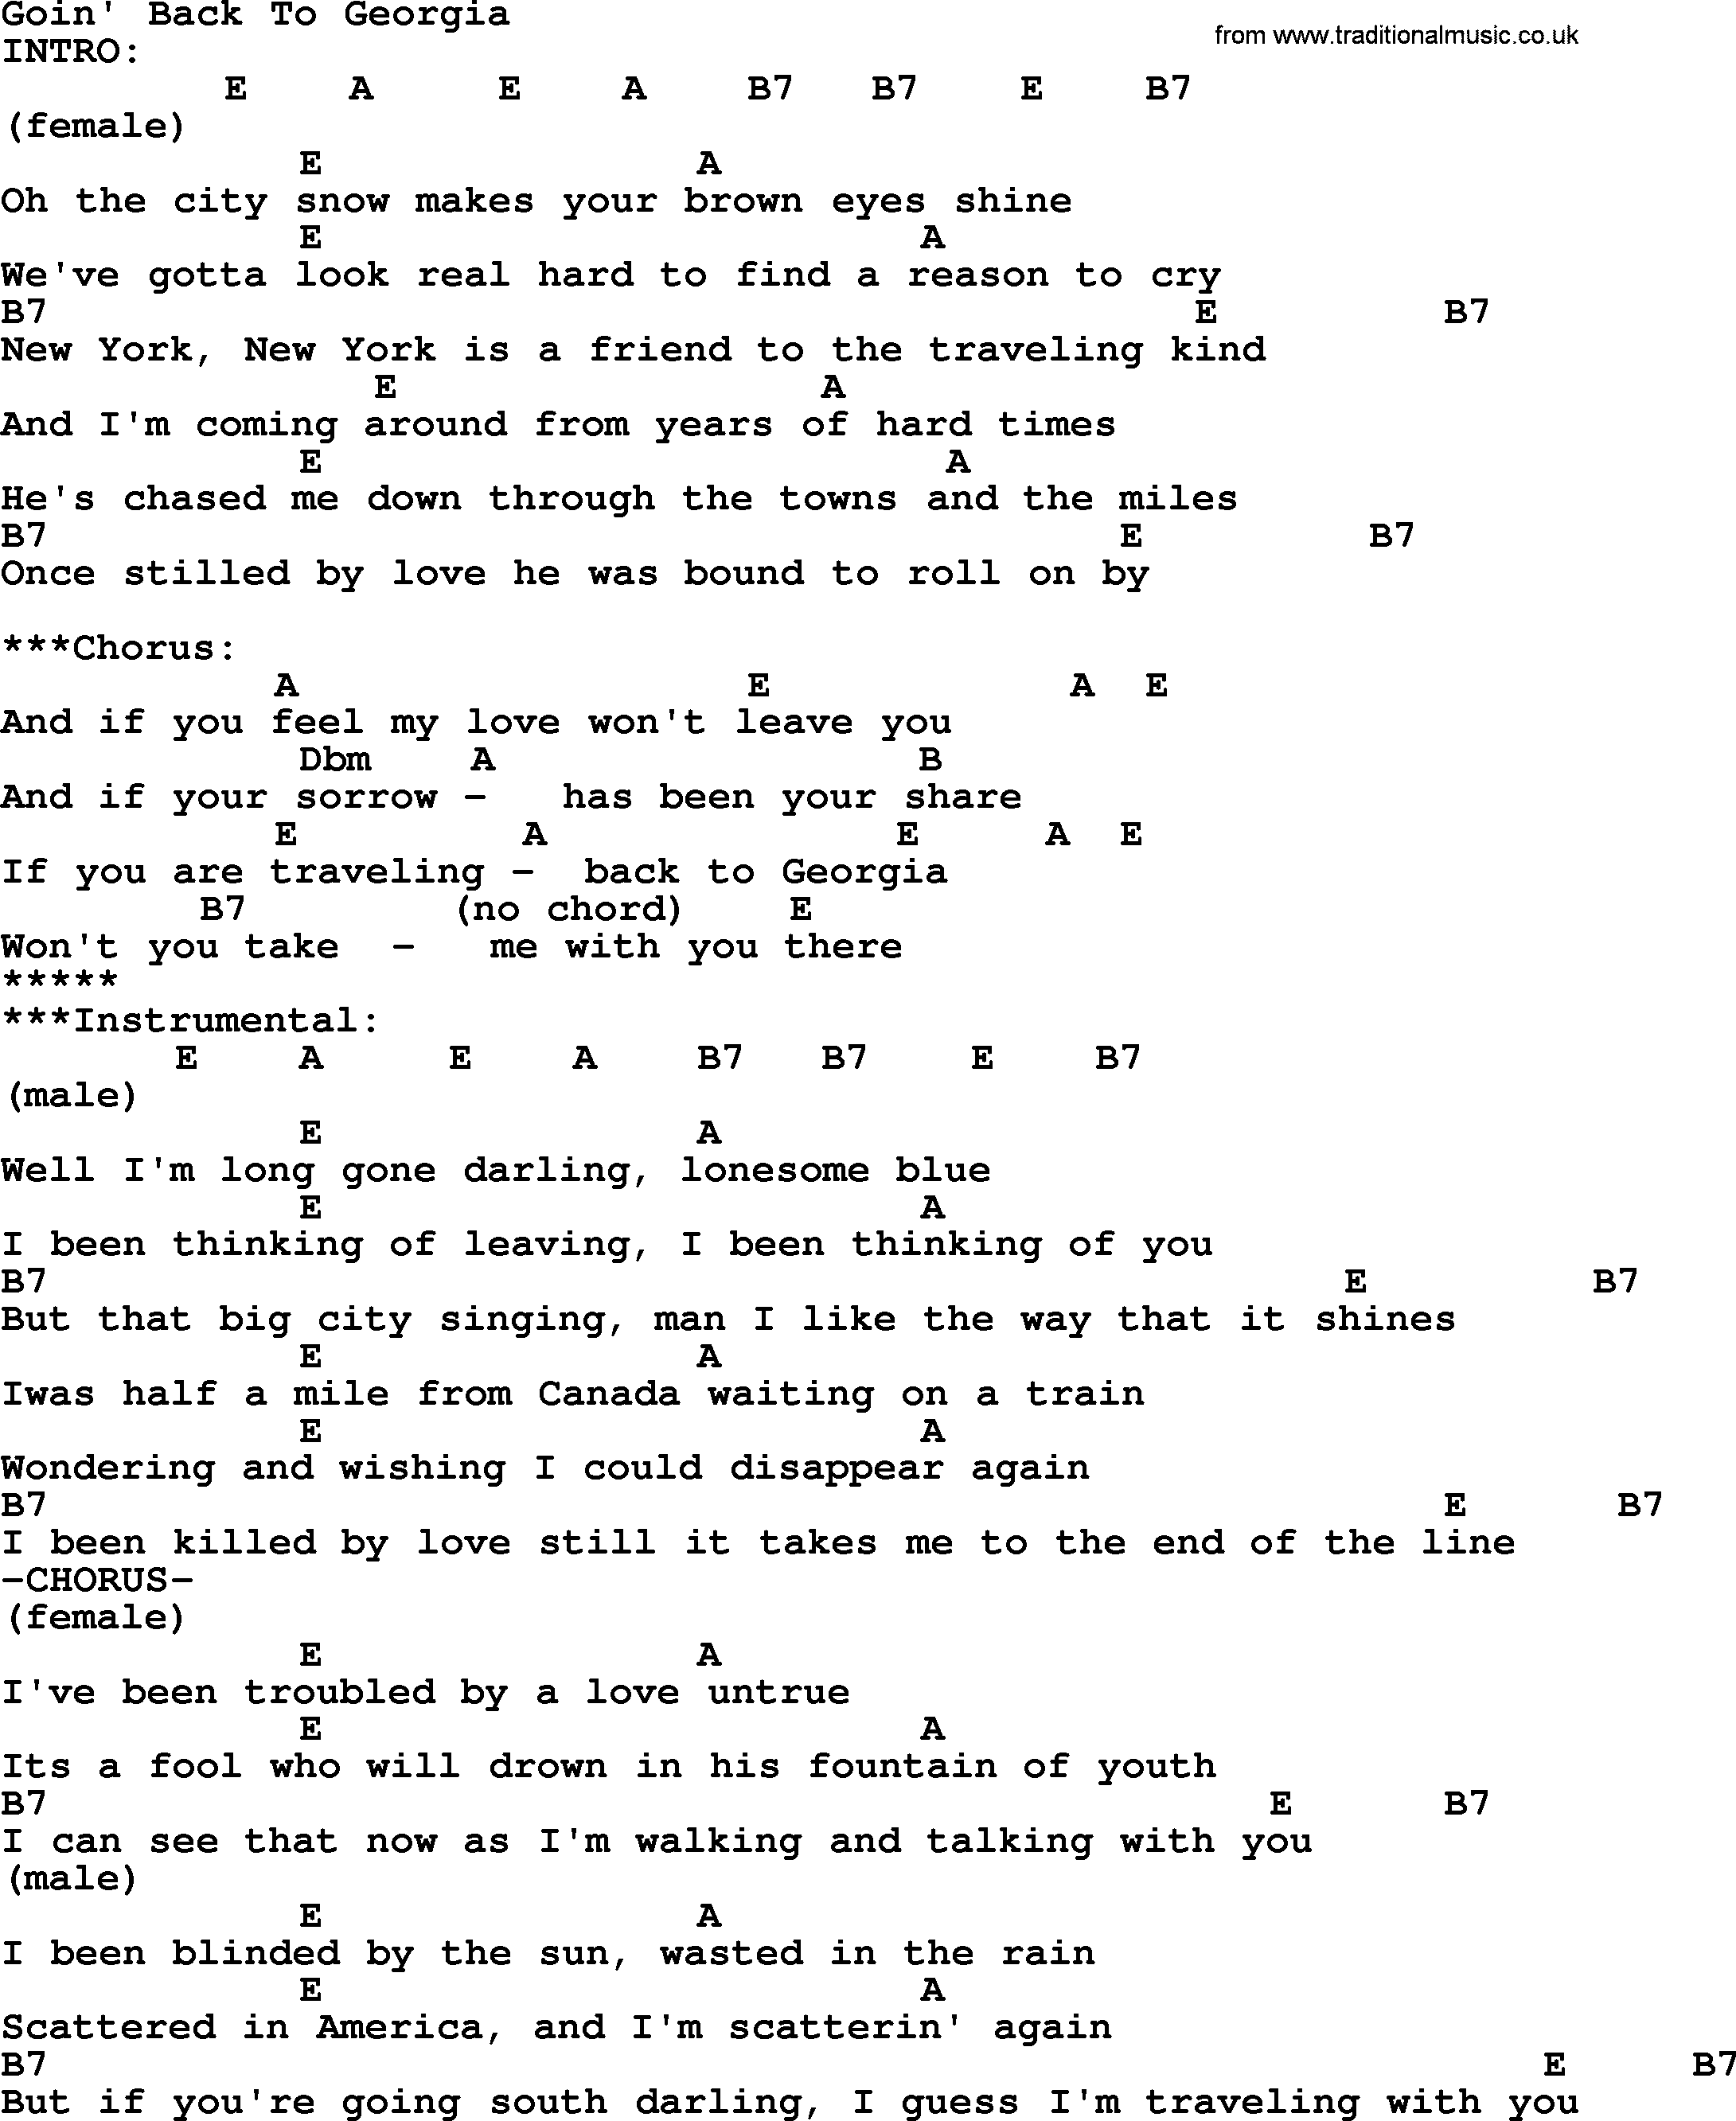 Bluegrass song: Goin' Back To Georgia, lyrics and chords